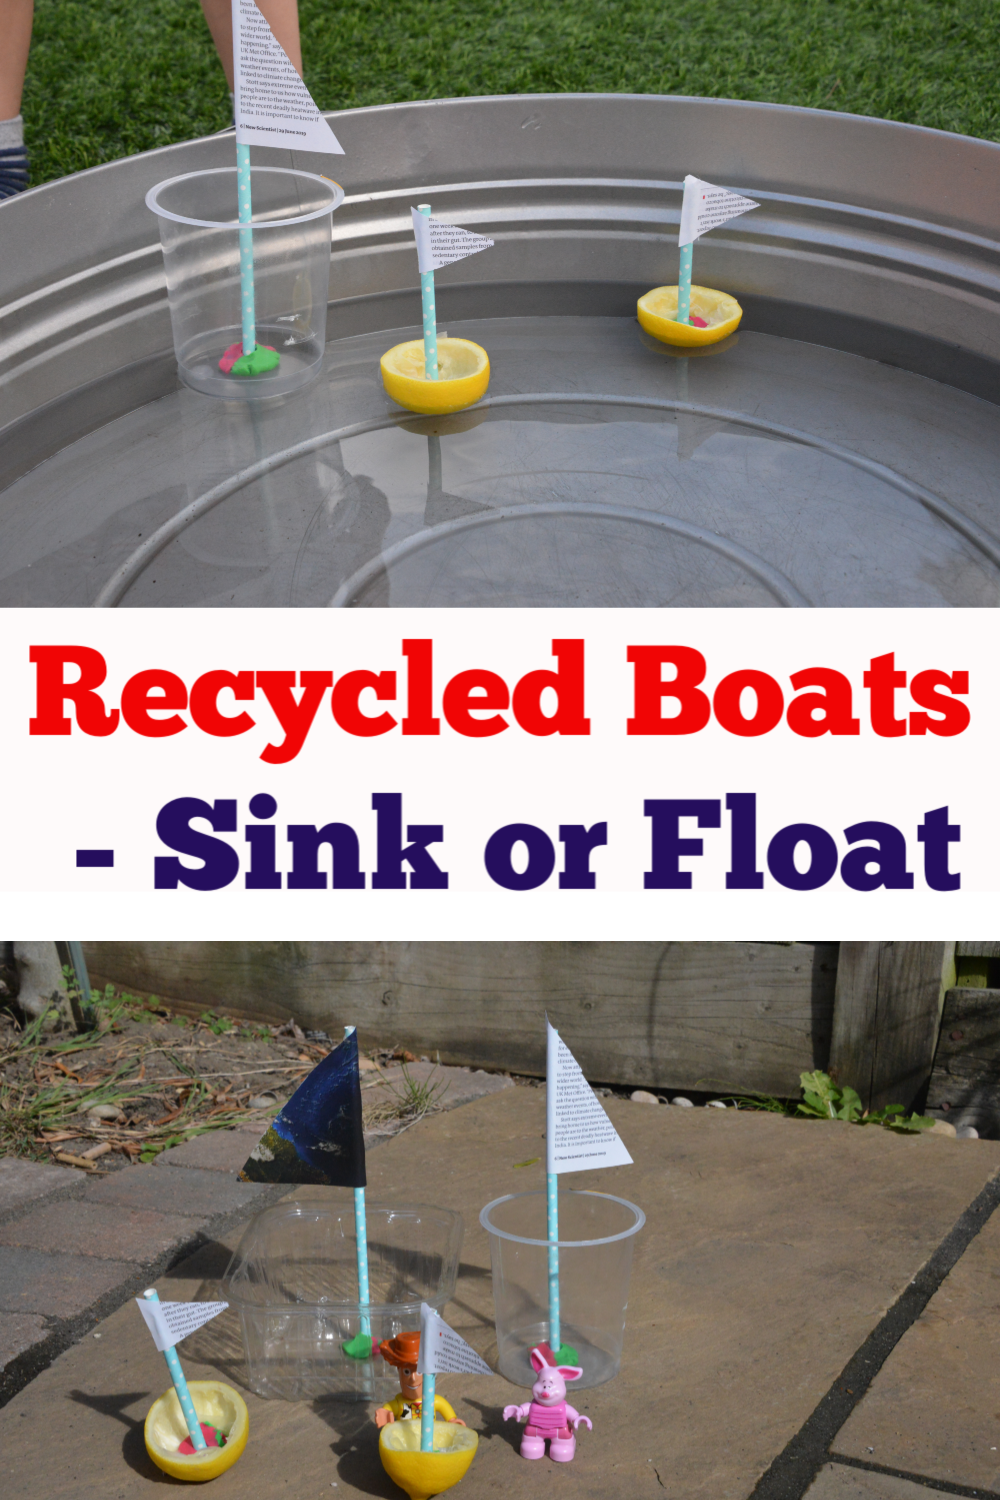 Recycled Boats - Sink or Float - Preschool Science Experiment